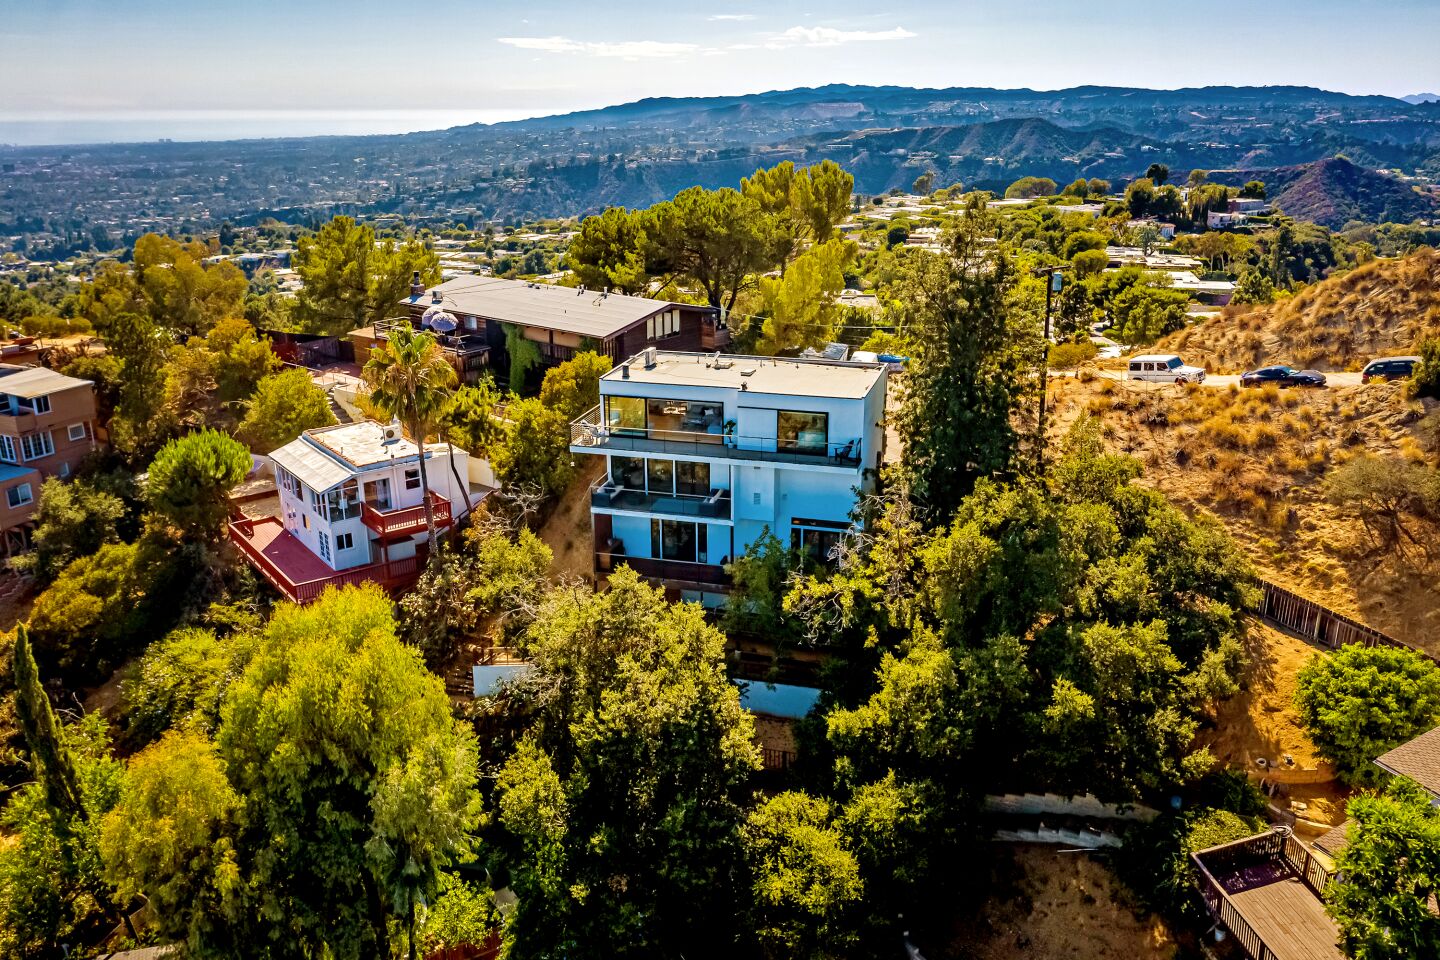 The Laurel Canyon home of KISS rocker Gene Simmons, listed for $2.2 million, takes in sweeping views from three levels of decking.